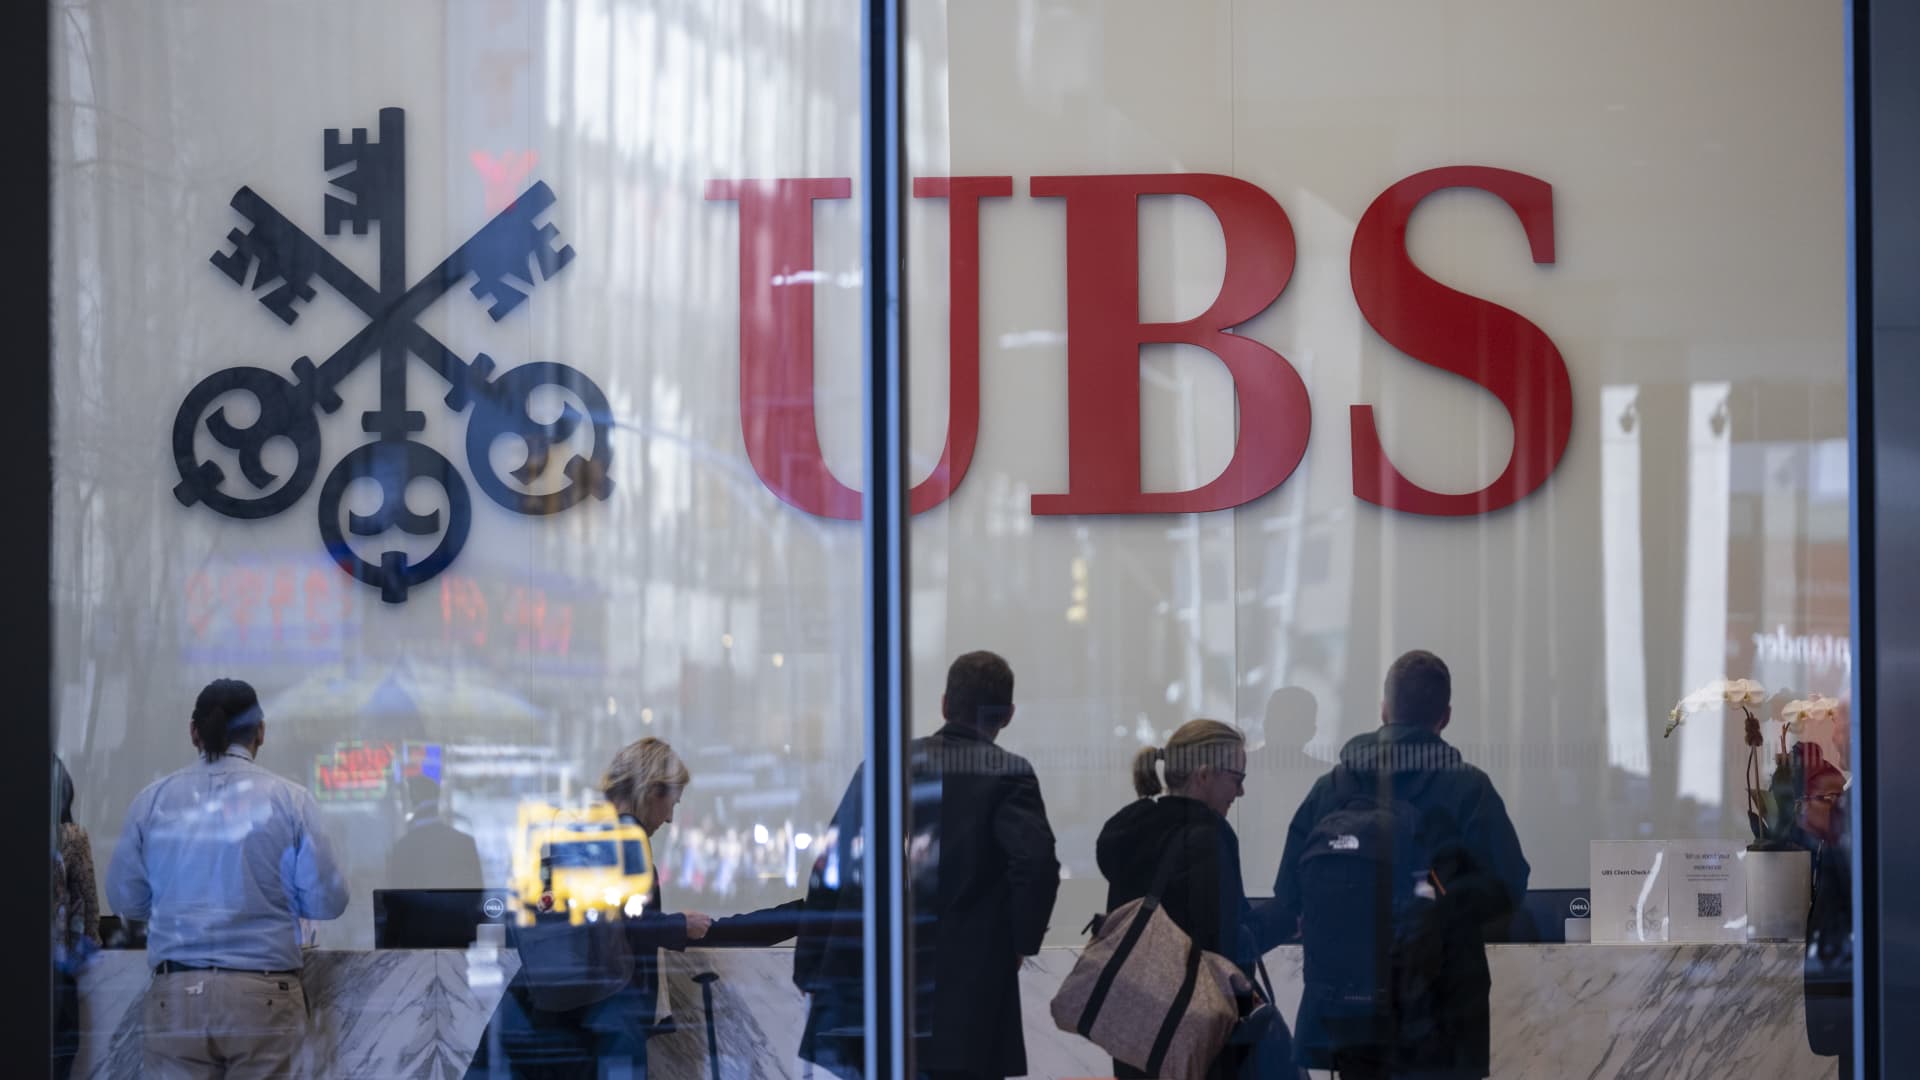 UBS names Sergio Ermotti as its new Group CEO, following acquisition deal of Credit Suisse